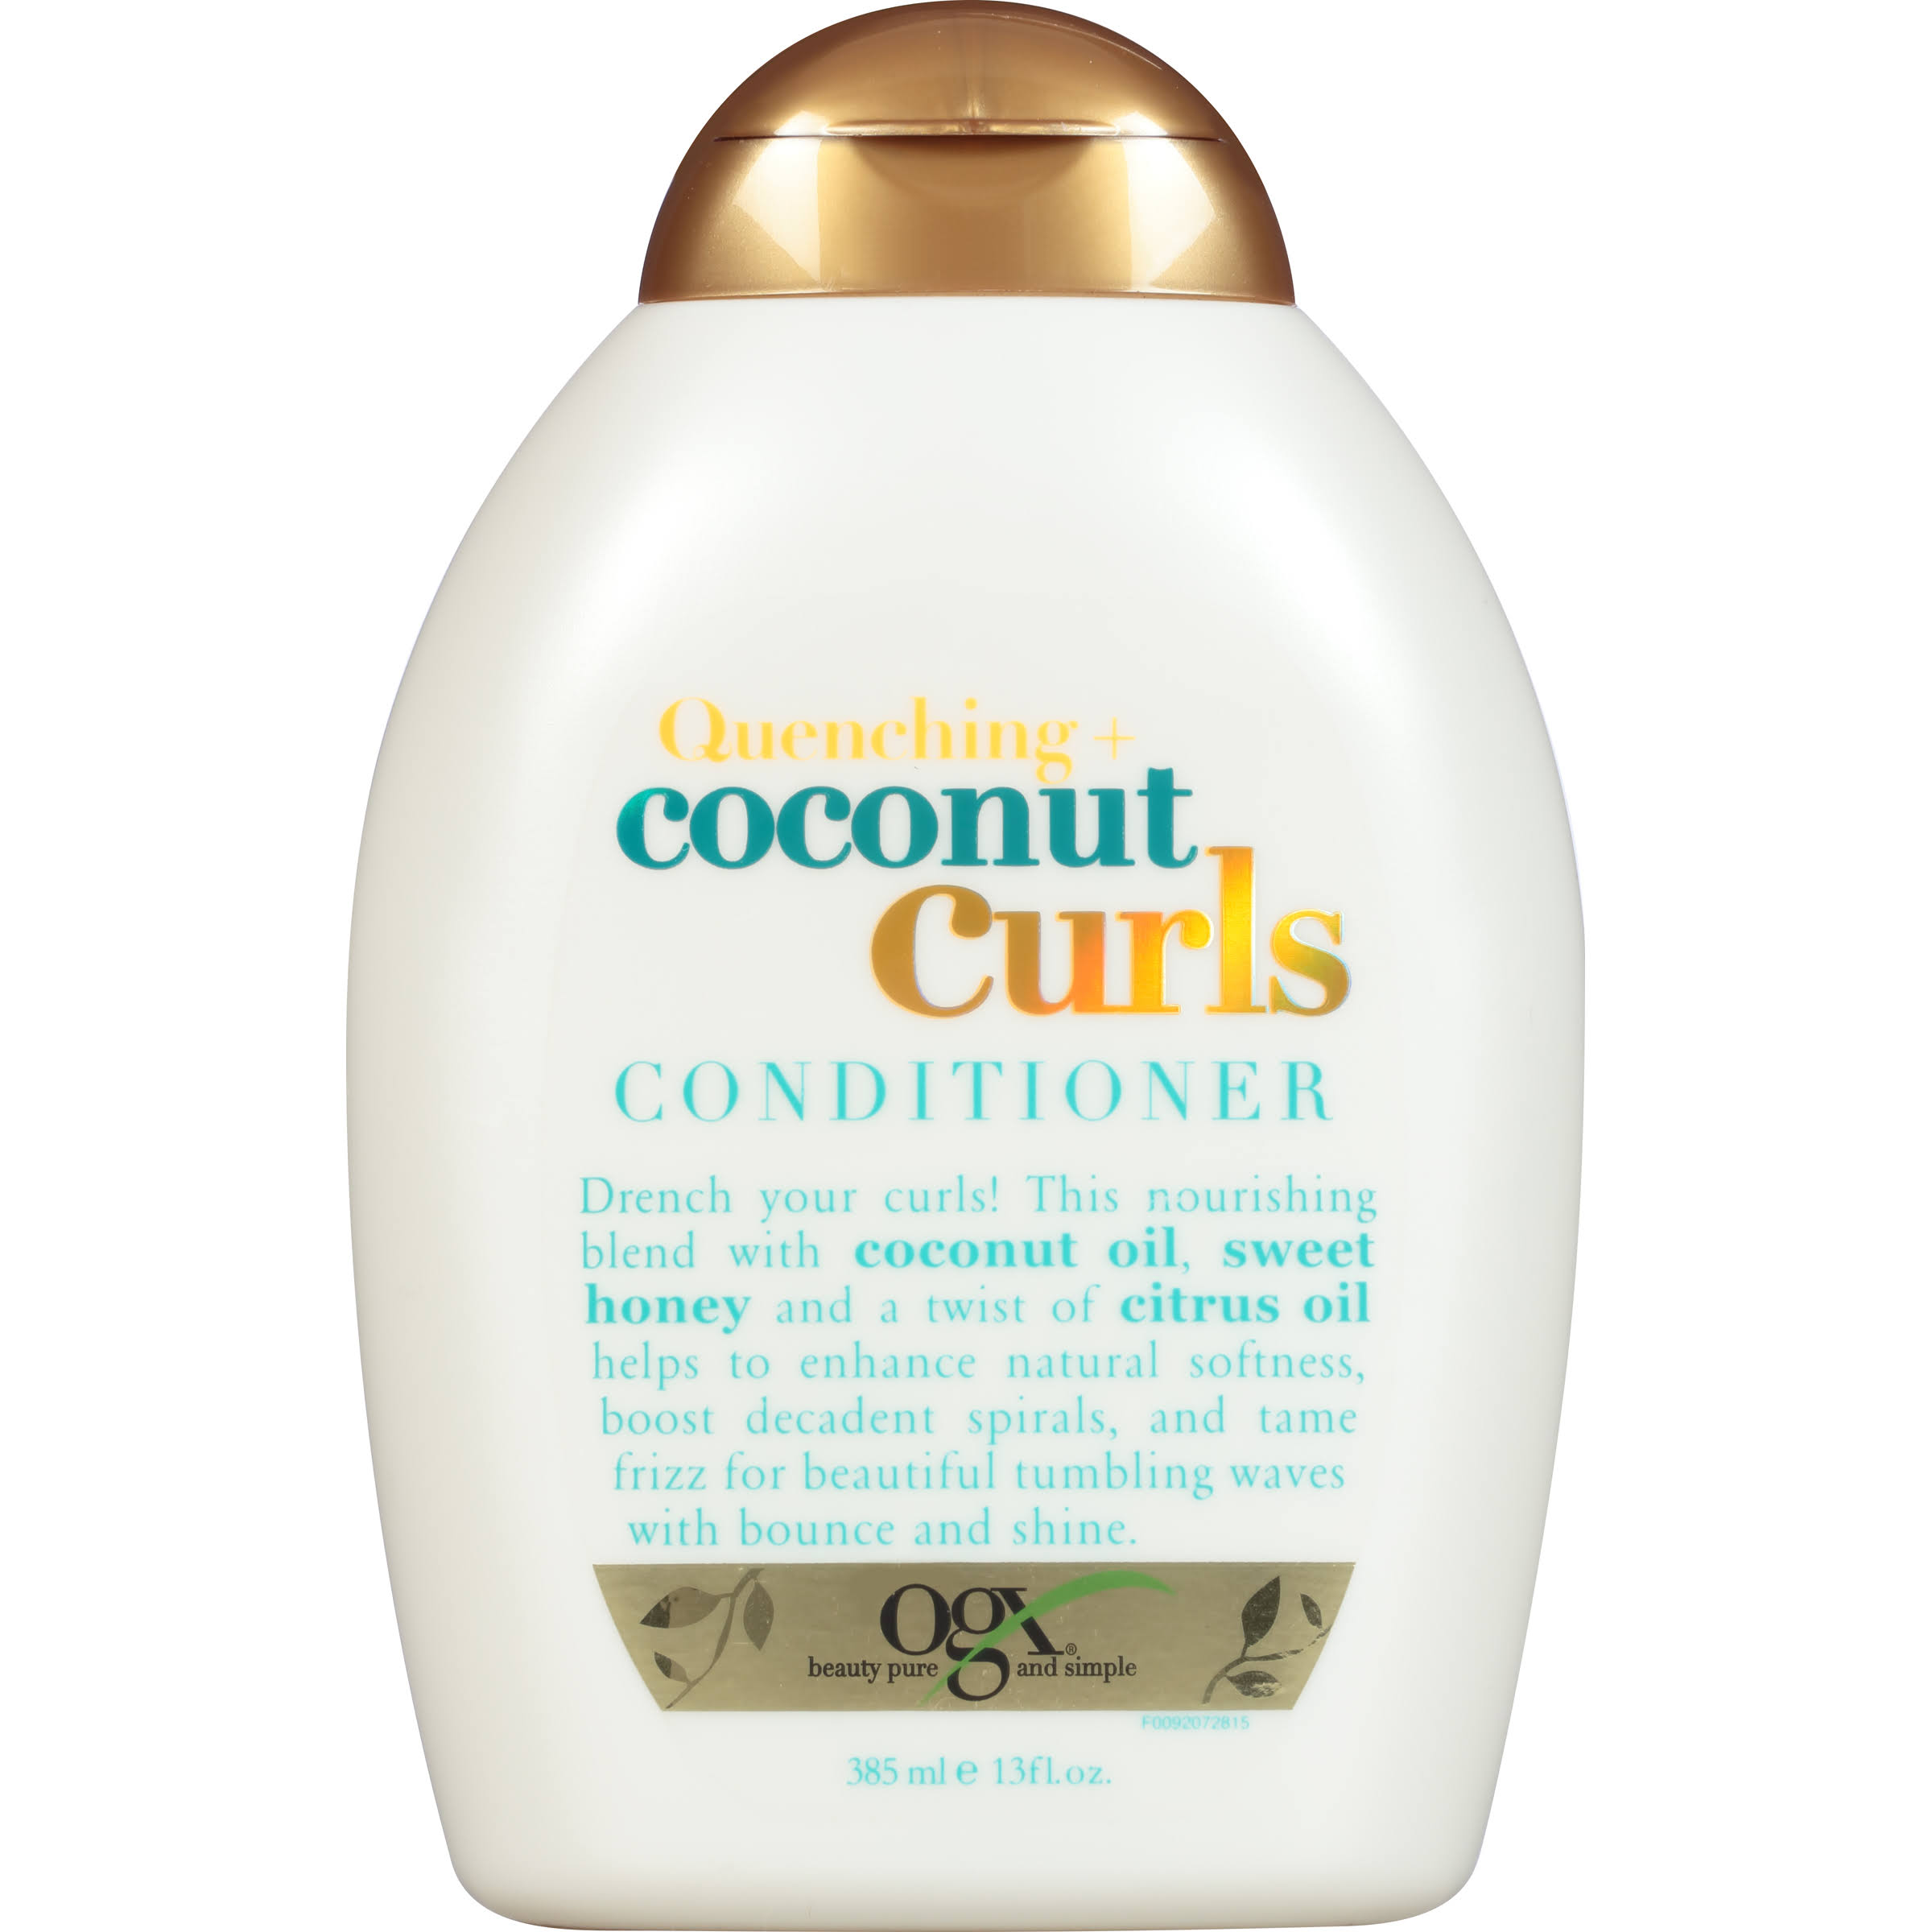 Ogx Quenching + Coconut Curls Conditioner - 385ml